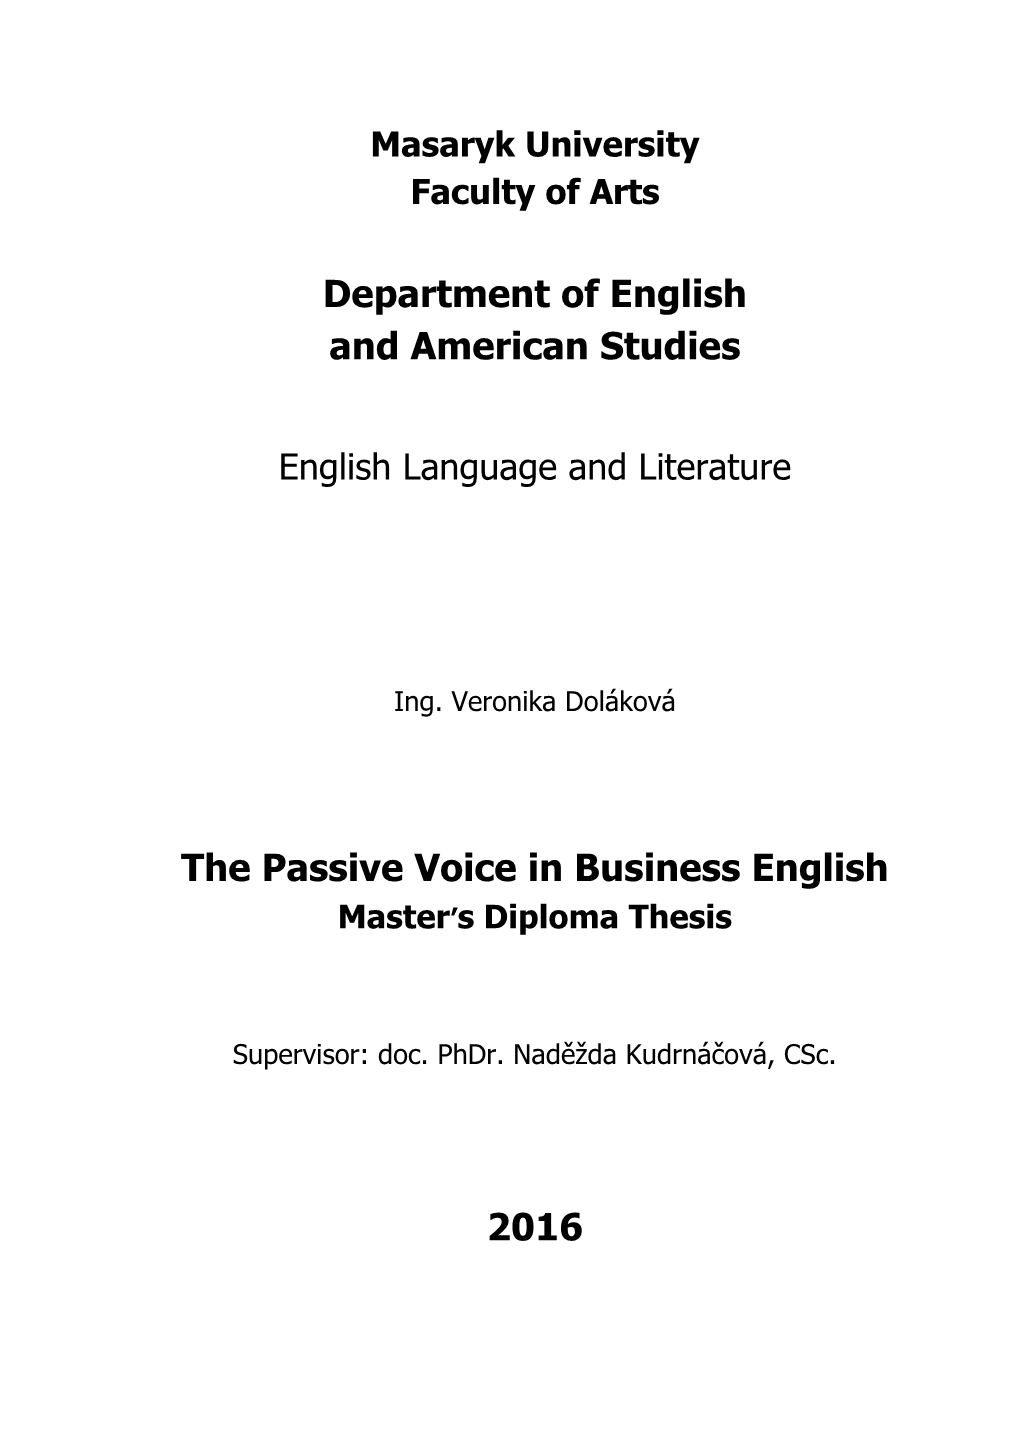 Department of English and American Studies the Passive Voice In